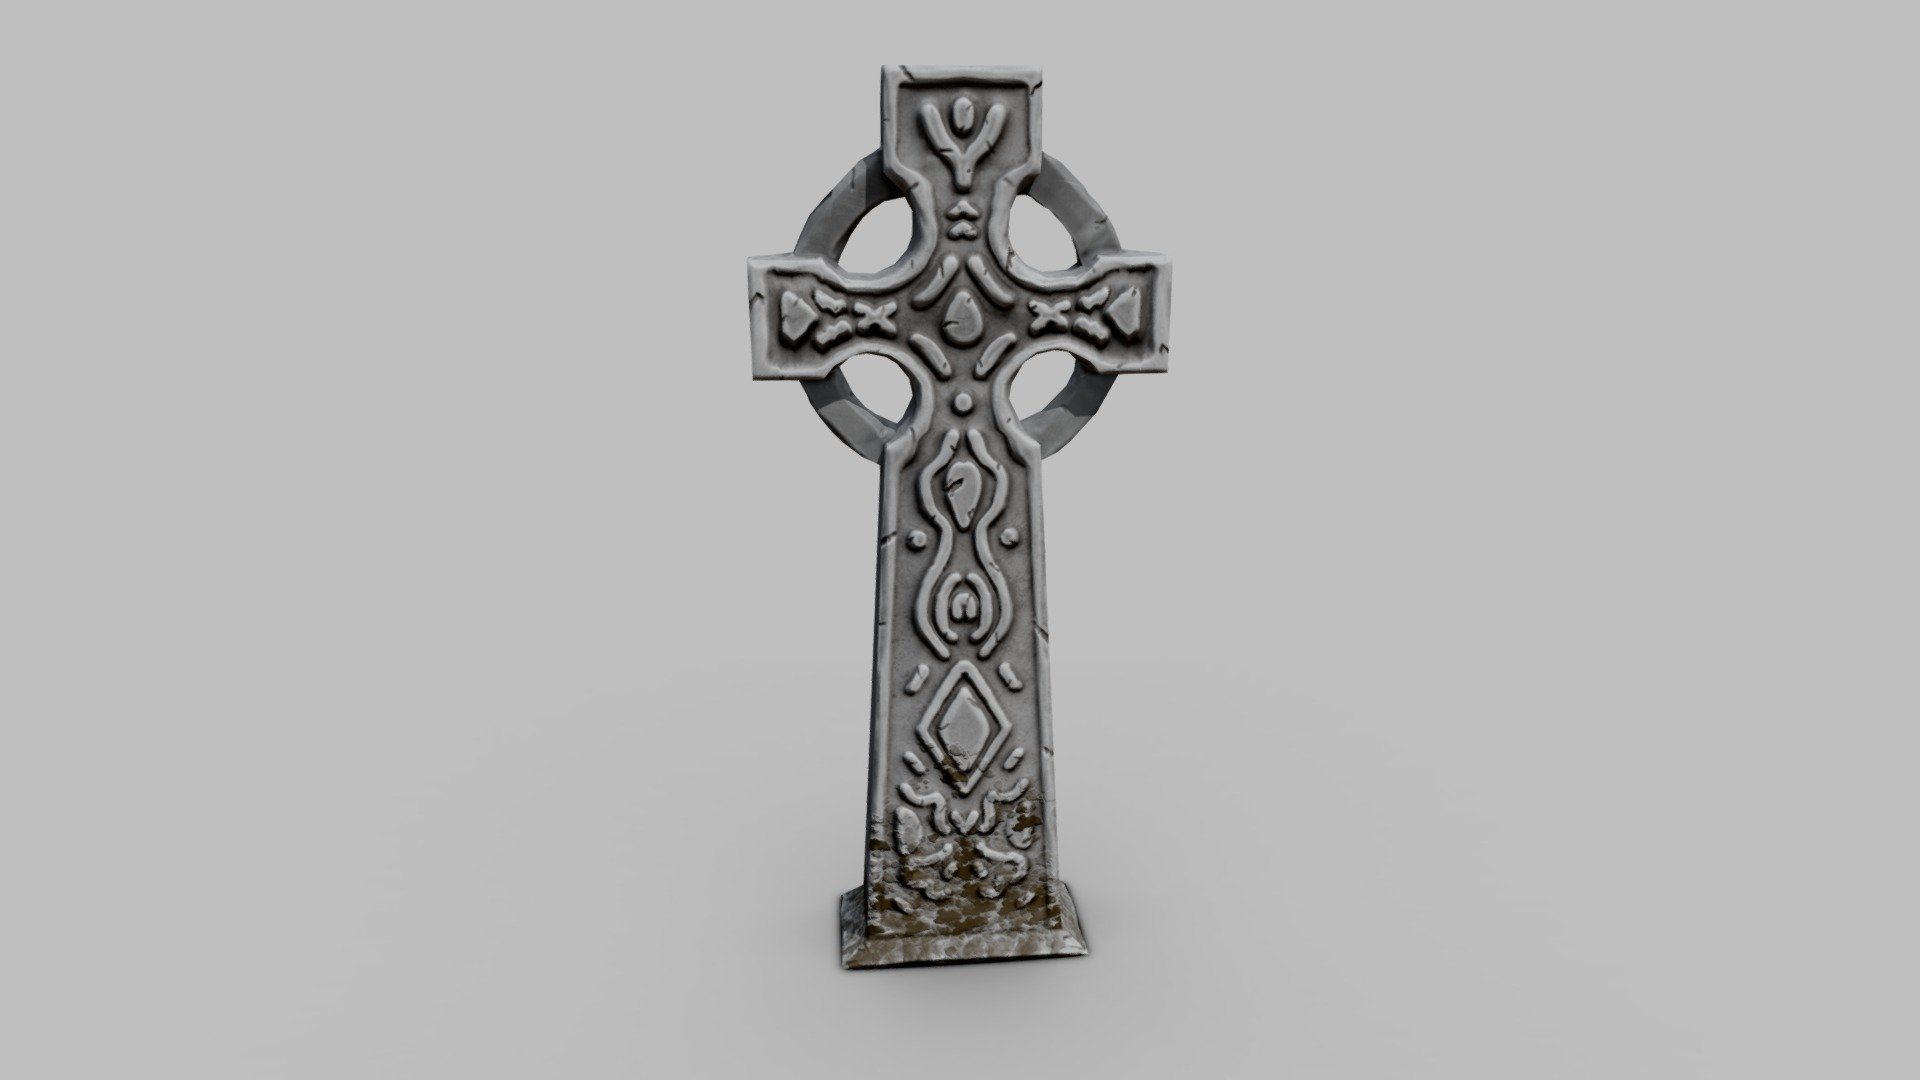 Stylized Tombstone I modeled, sculpted and retopologized in Blender 2.82 then textured in Substance Painter.
Verts: 520 
Tris: 1.043
Textures: 1024x1024px

Reference Image: https://www.textures.com/download/tombstonescross0024/80909
Idea: https://www.artstation.com/artwork/dOVoJX - Tomb Stone (Prop) - 3D model by PhilStein 3d model